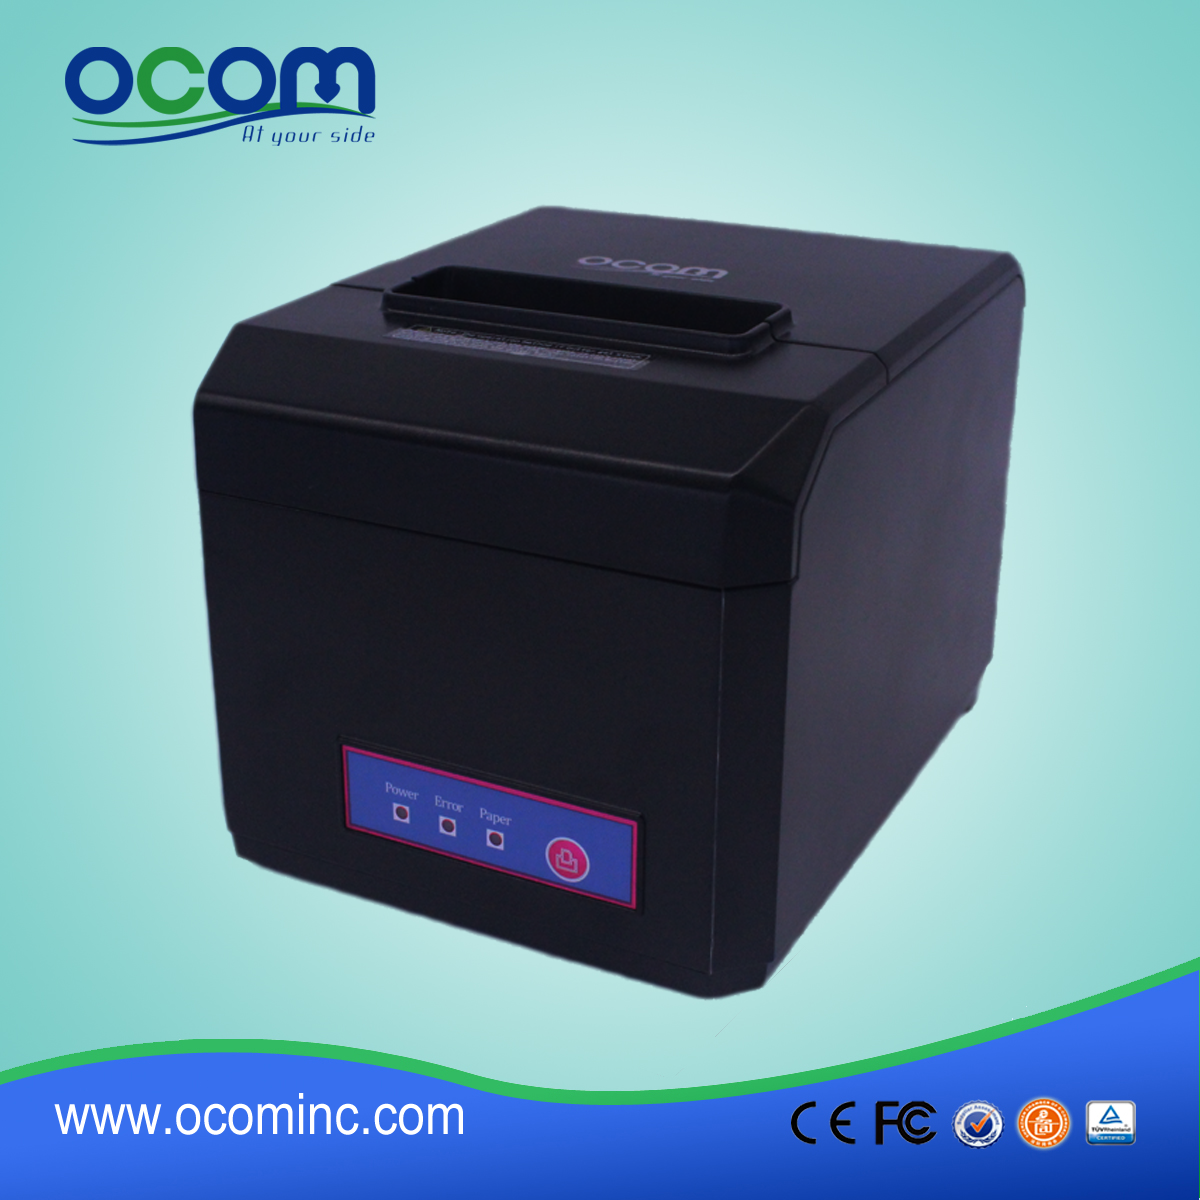 OCPP-80F 80mm Blutooth Wifi thermal printer with auto cutter